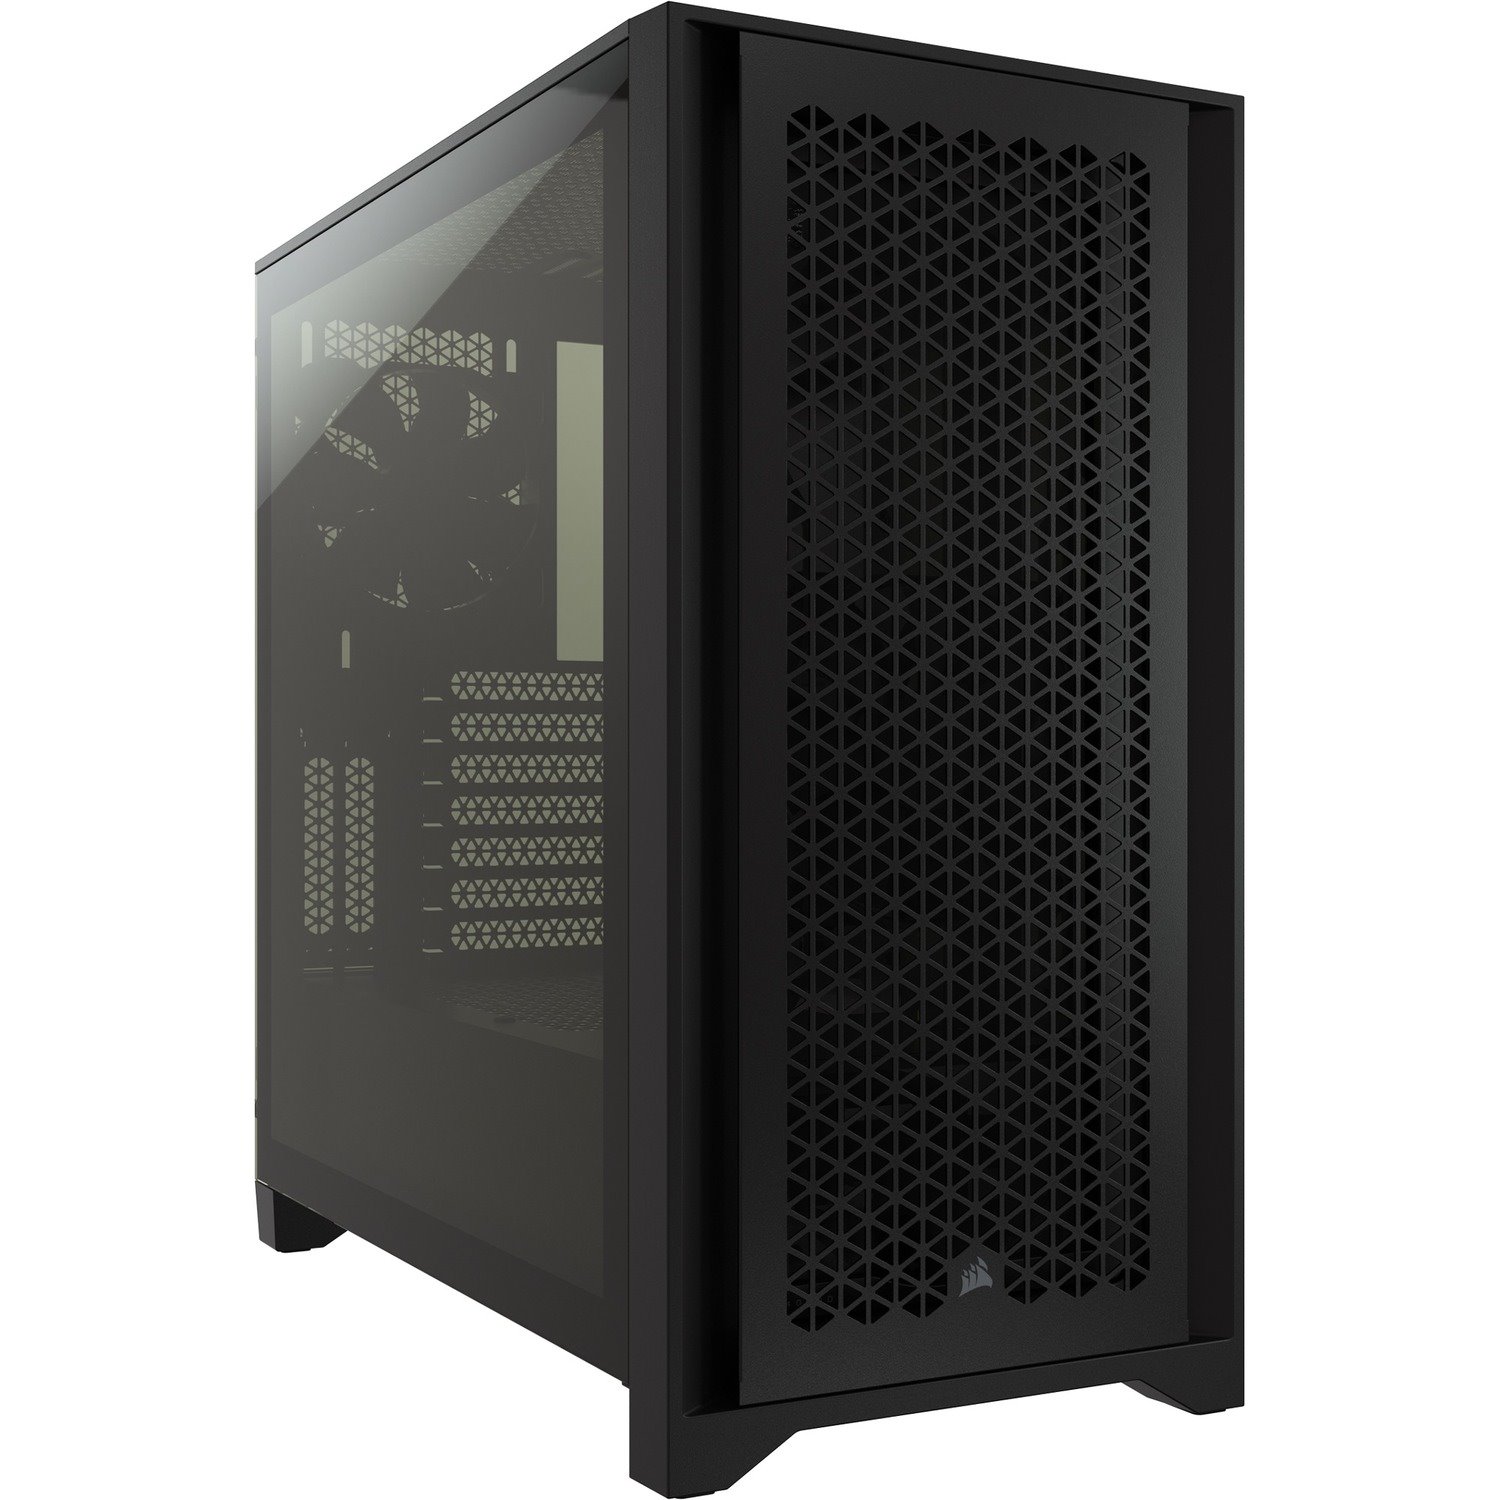 Corsair AIRFLOW Computer Case - ATX Motherboard Supported - Mid-tower - Steel, Tempered Glass, Plastic - Black